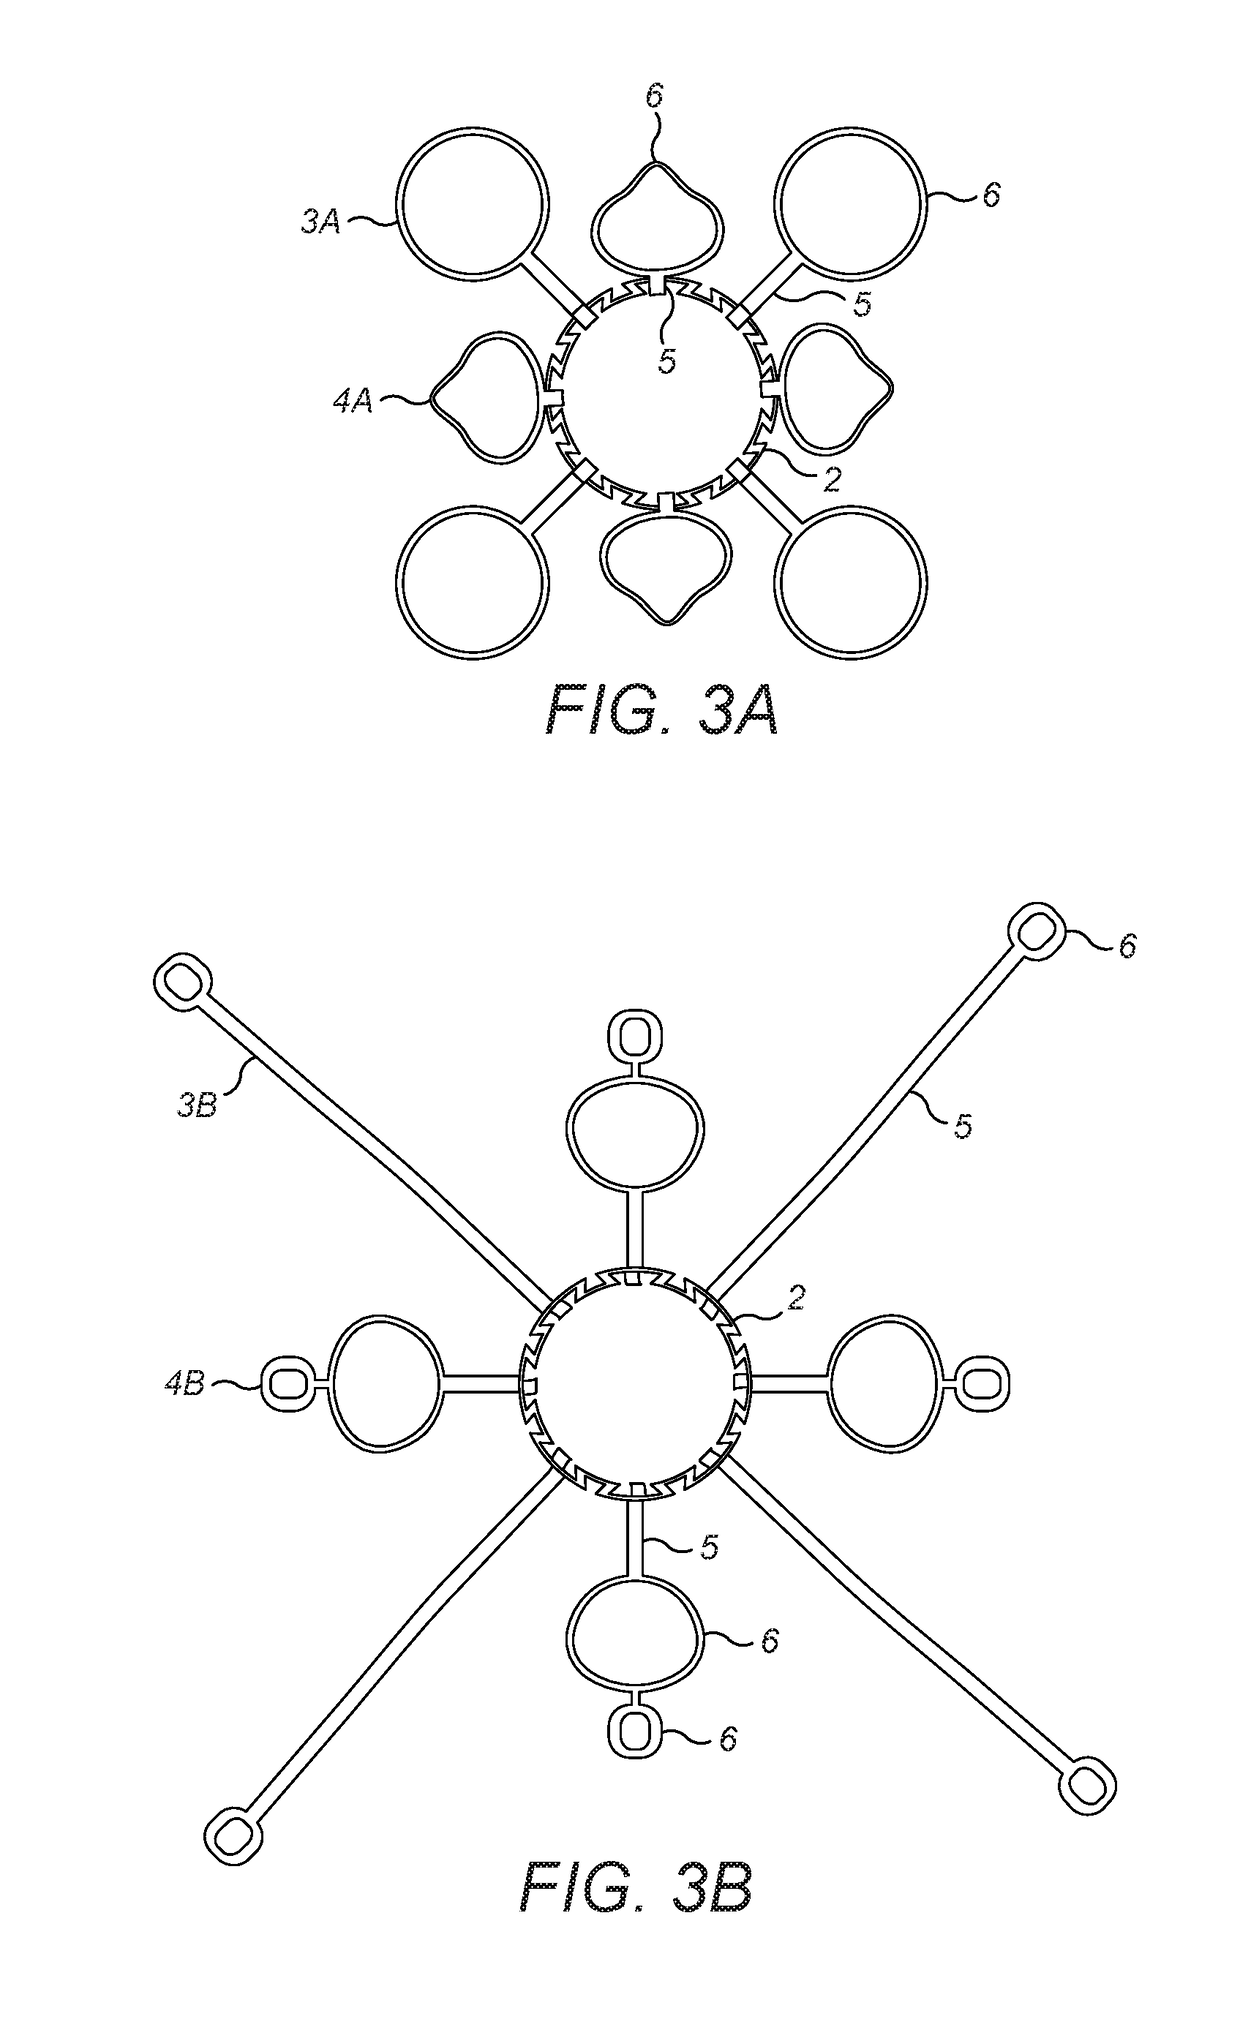 Connector for fluid communication between two anatomical compartments